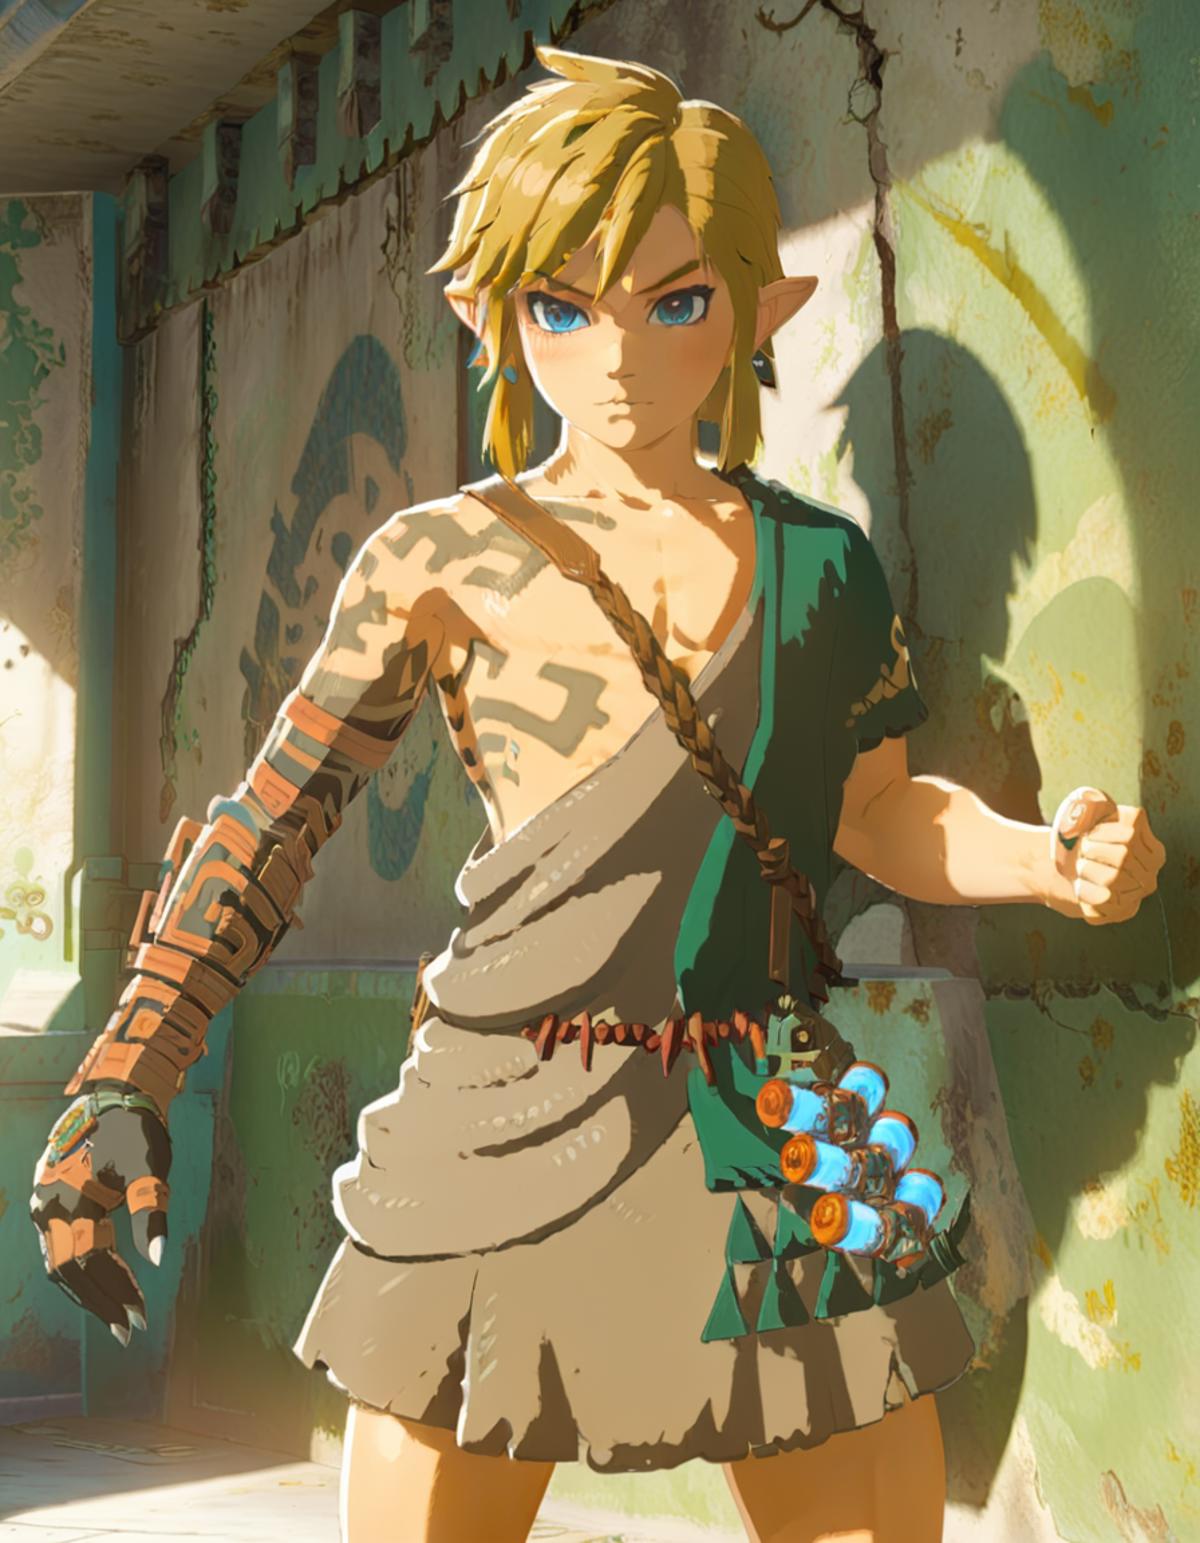 Link from Tears of the Kingdom image by aLab